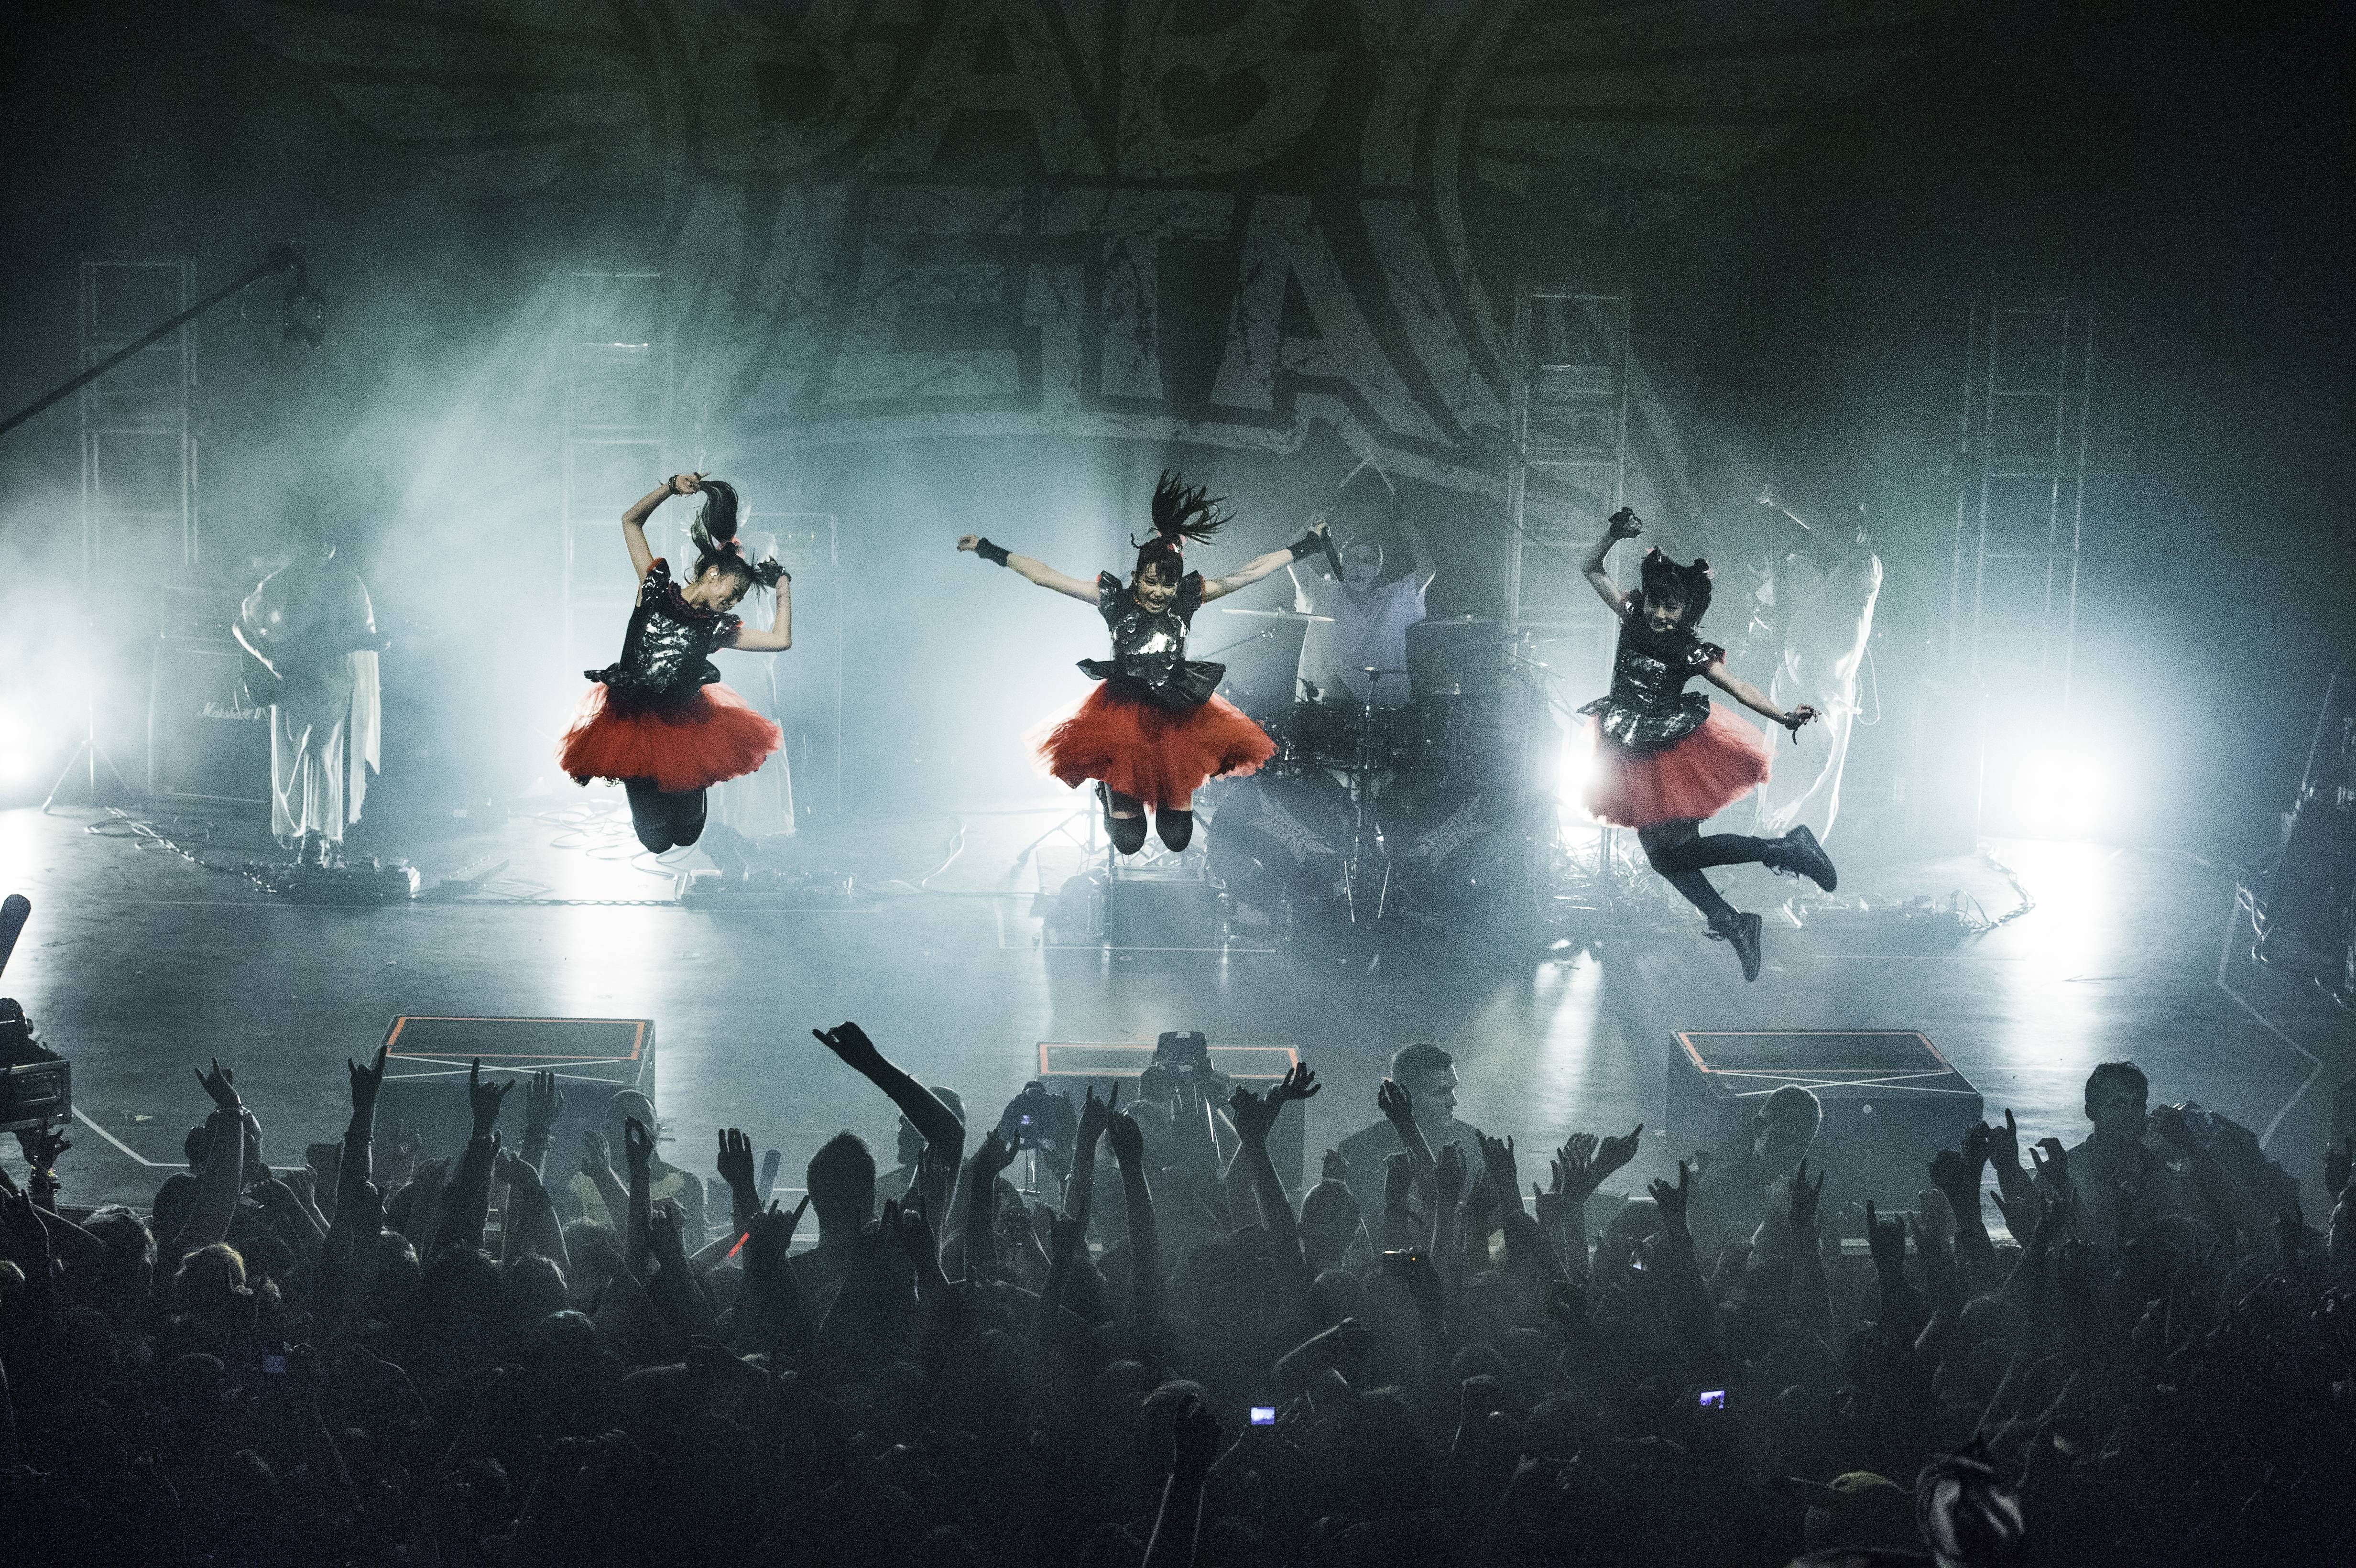 BABYMETAL completing a show